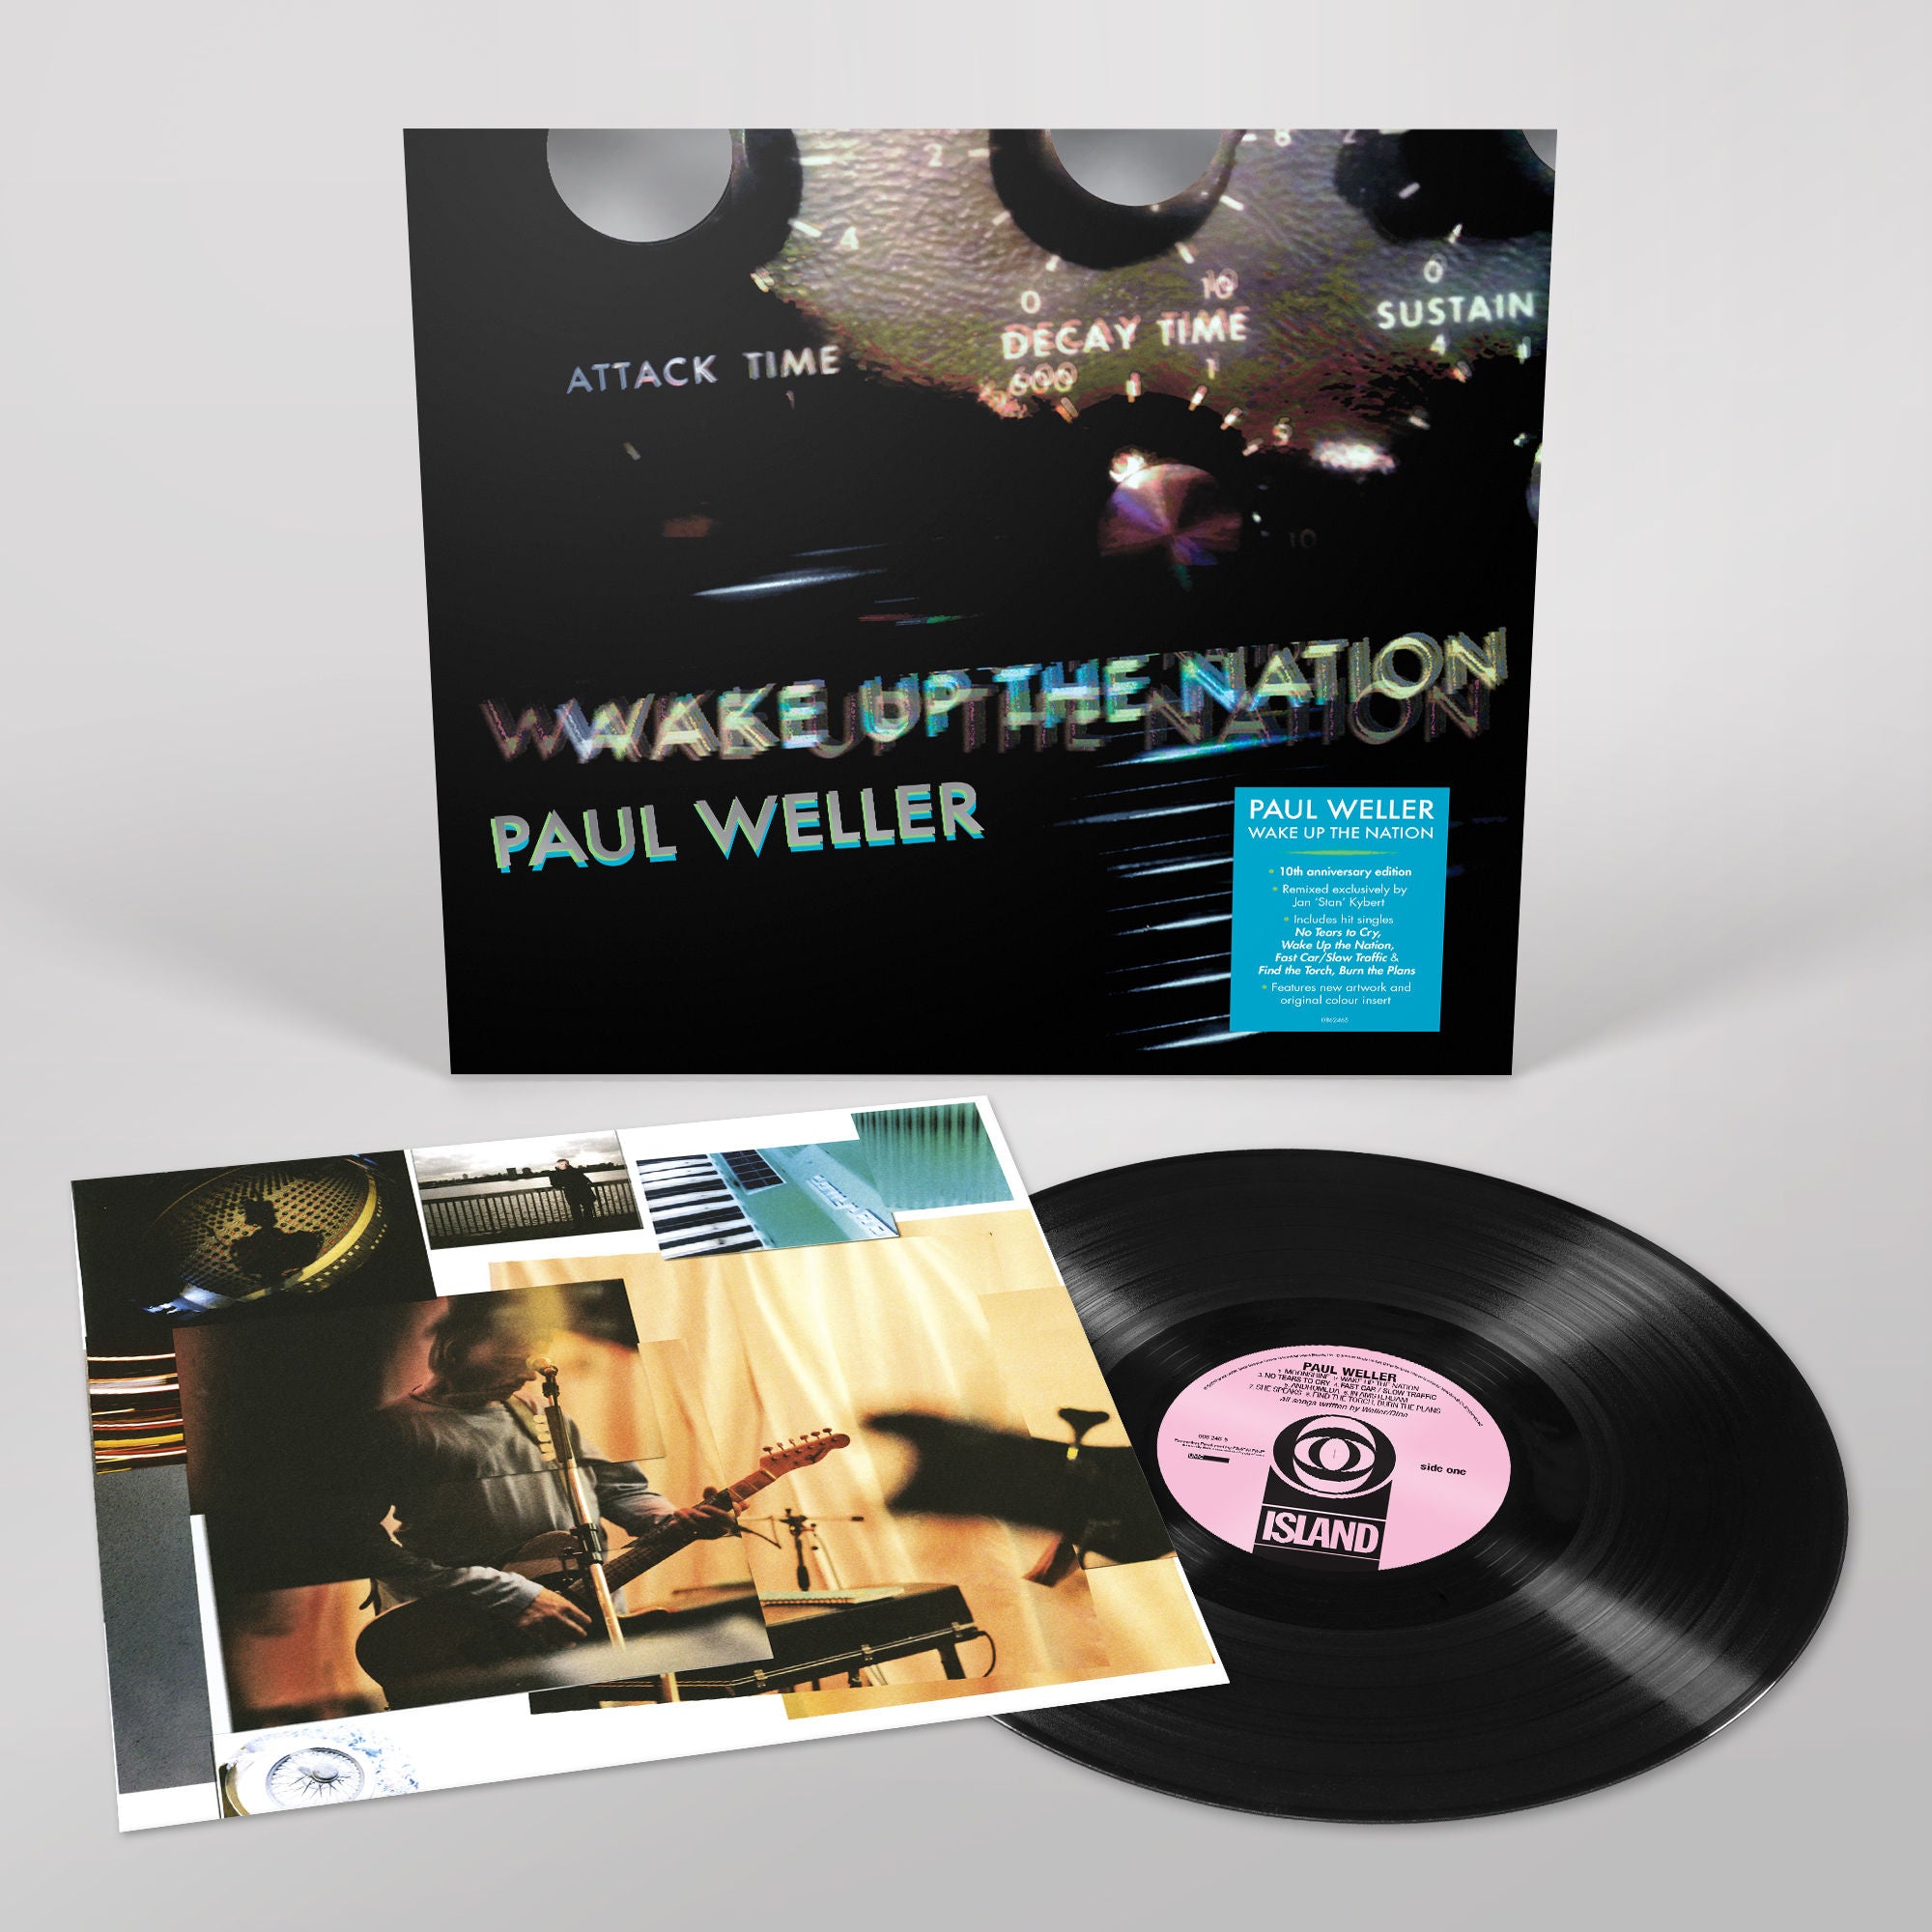 Paul Weller - Wake Up The Nation - 10th Anniversary Remix Edition: Exclusive Vinyl